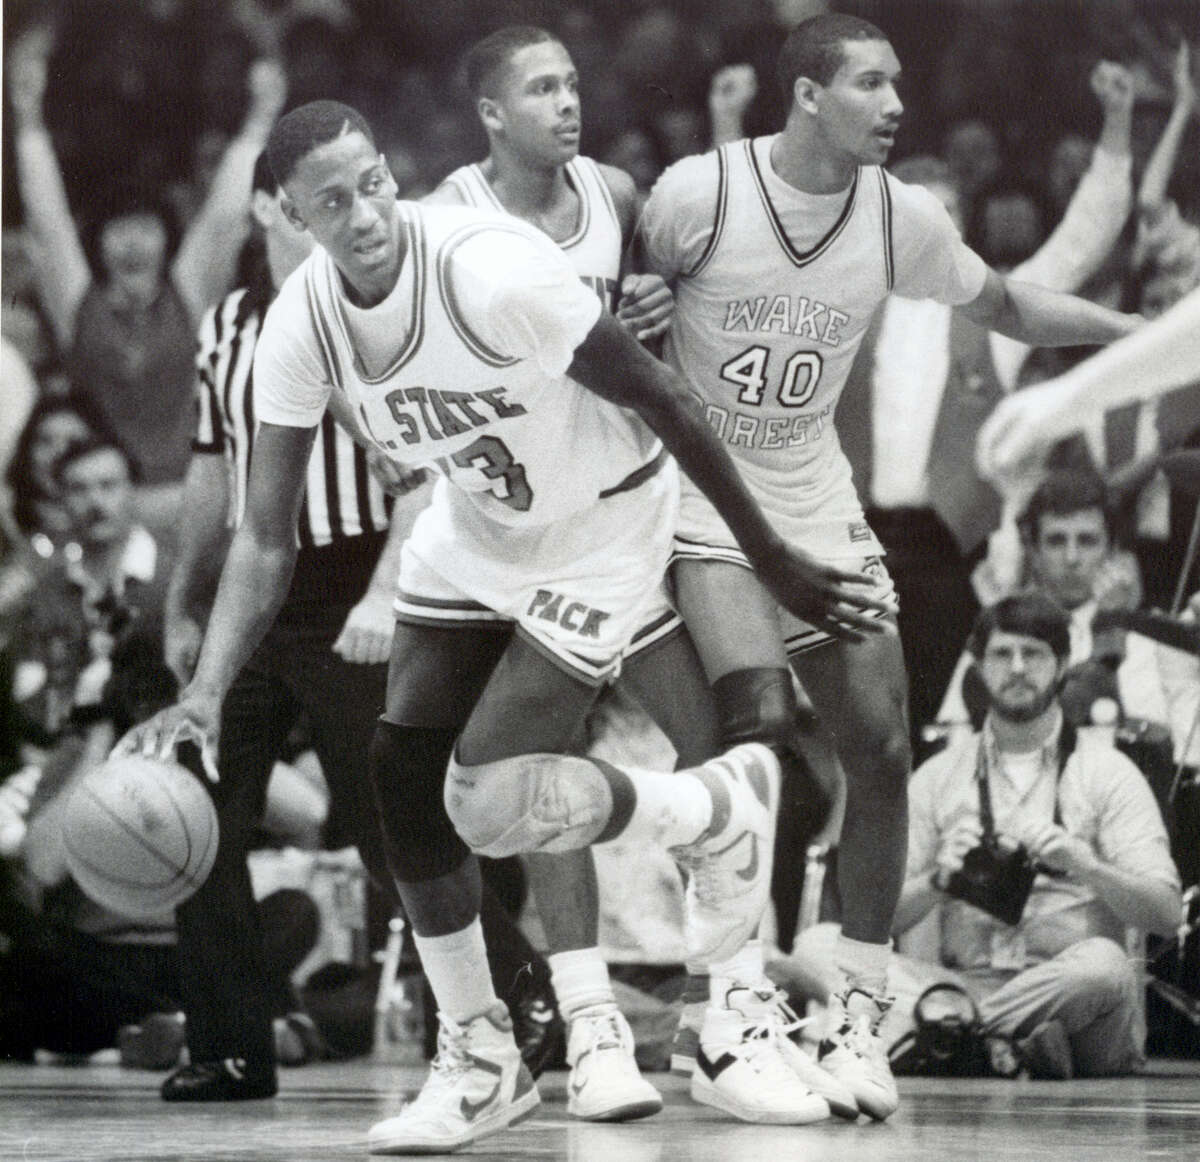 In this March 6, 1988 photo, North Carolina State NCAA college basketball player Charles Shackleford, left, plays against Wake Forest during a game in Raleigh, N.C. Shackleford, a North Carolina State basketball star in the 1980s who spent six seasons in the NBA, was found dead in his home on Jan. 27, 2017 in Kinston. He was 50.